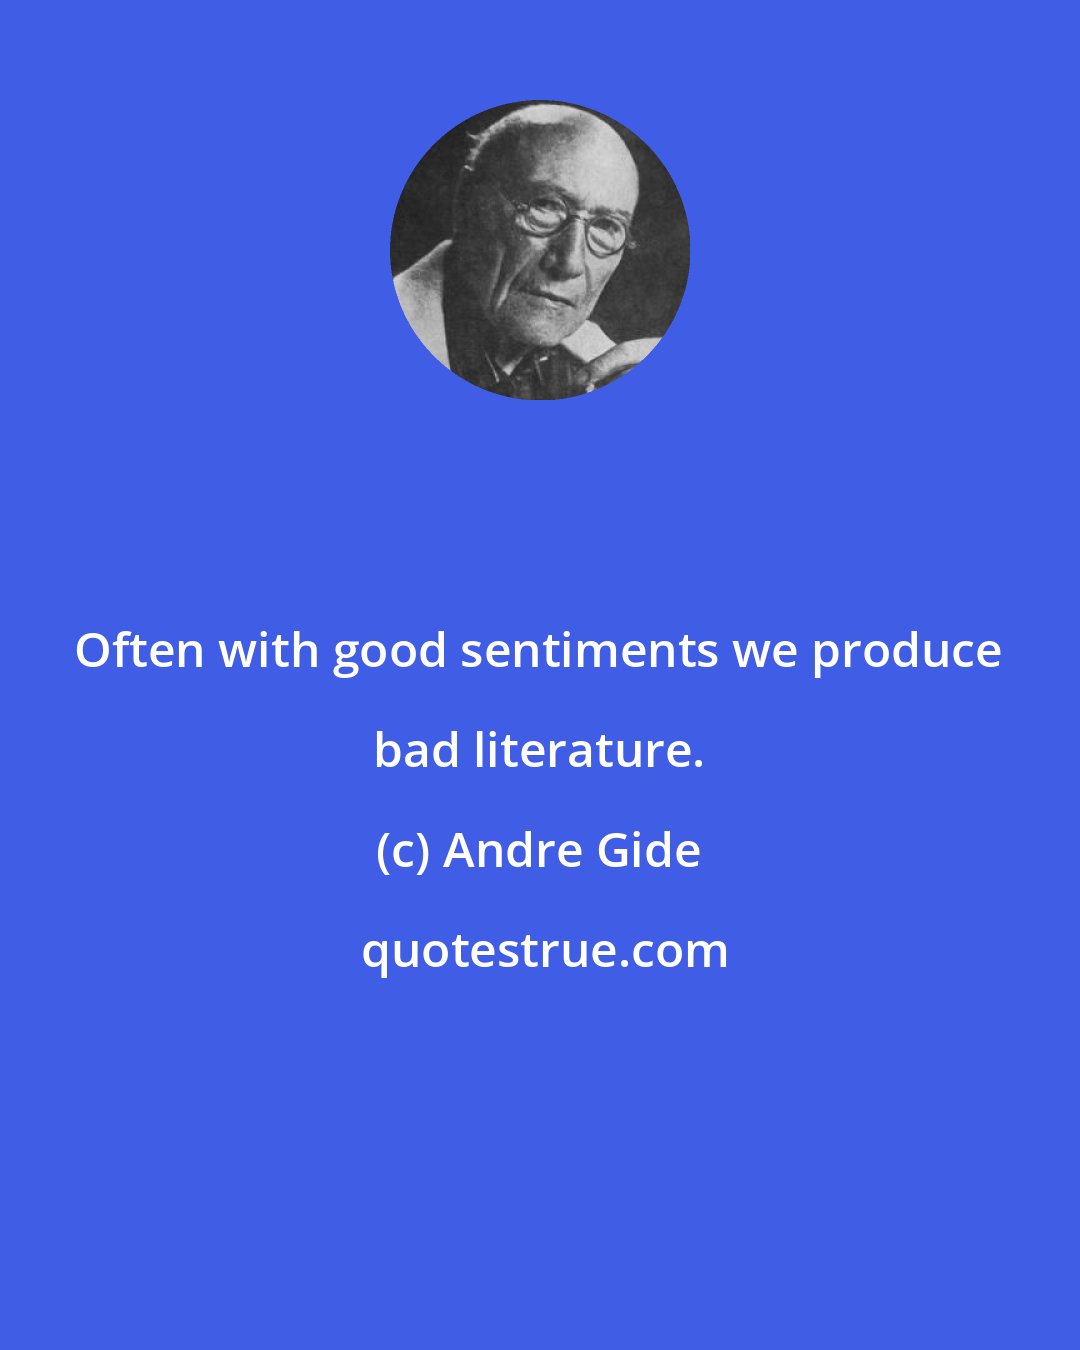 Andre Gide: Often with good sentiments we produce bad literature.